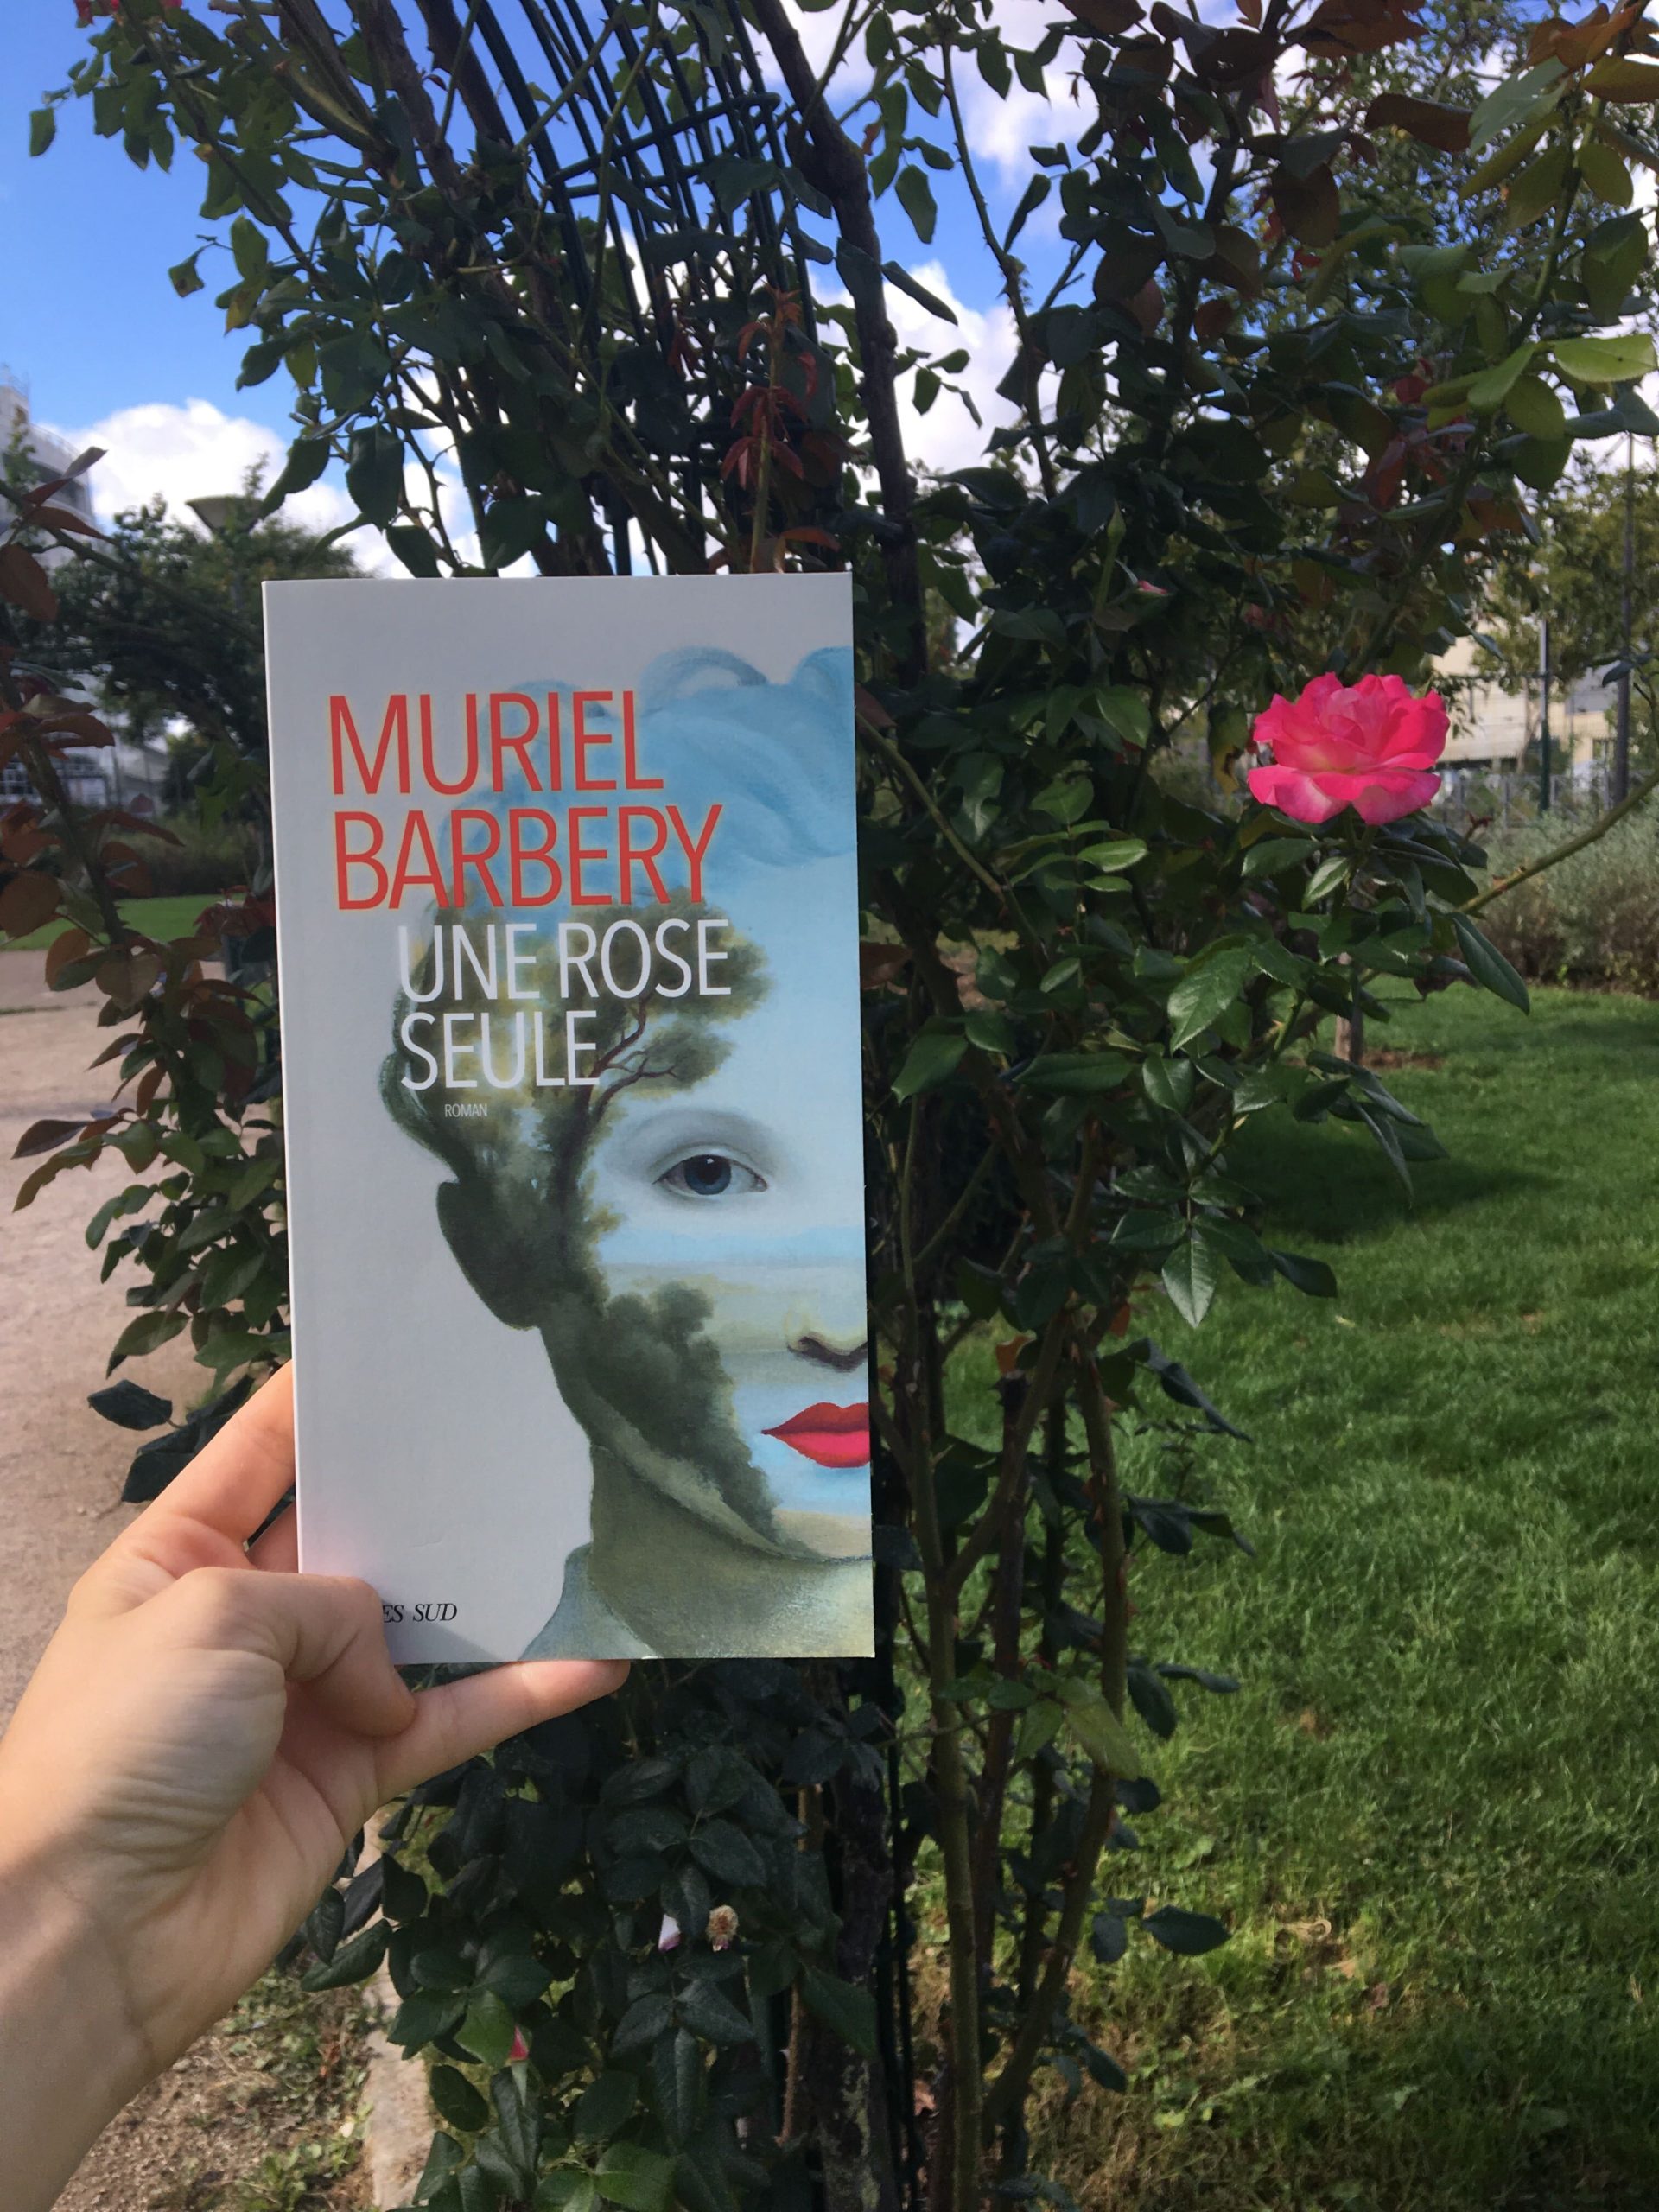 A Single Rose by Muriel Barbery